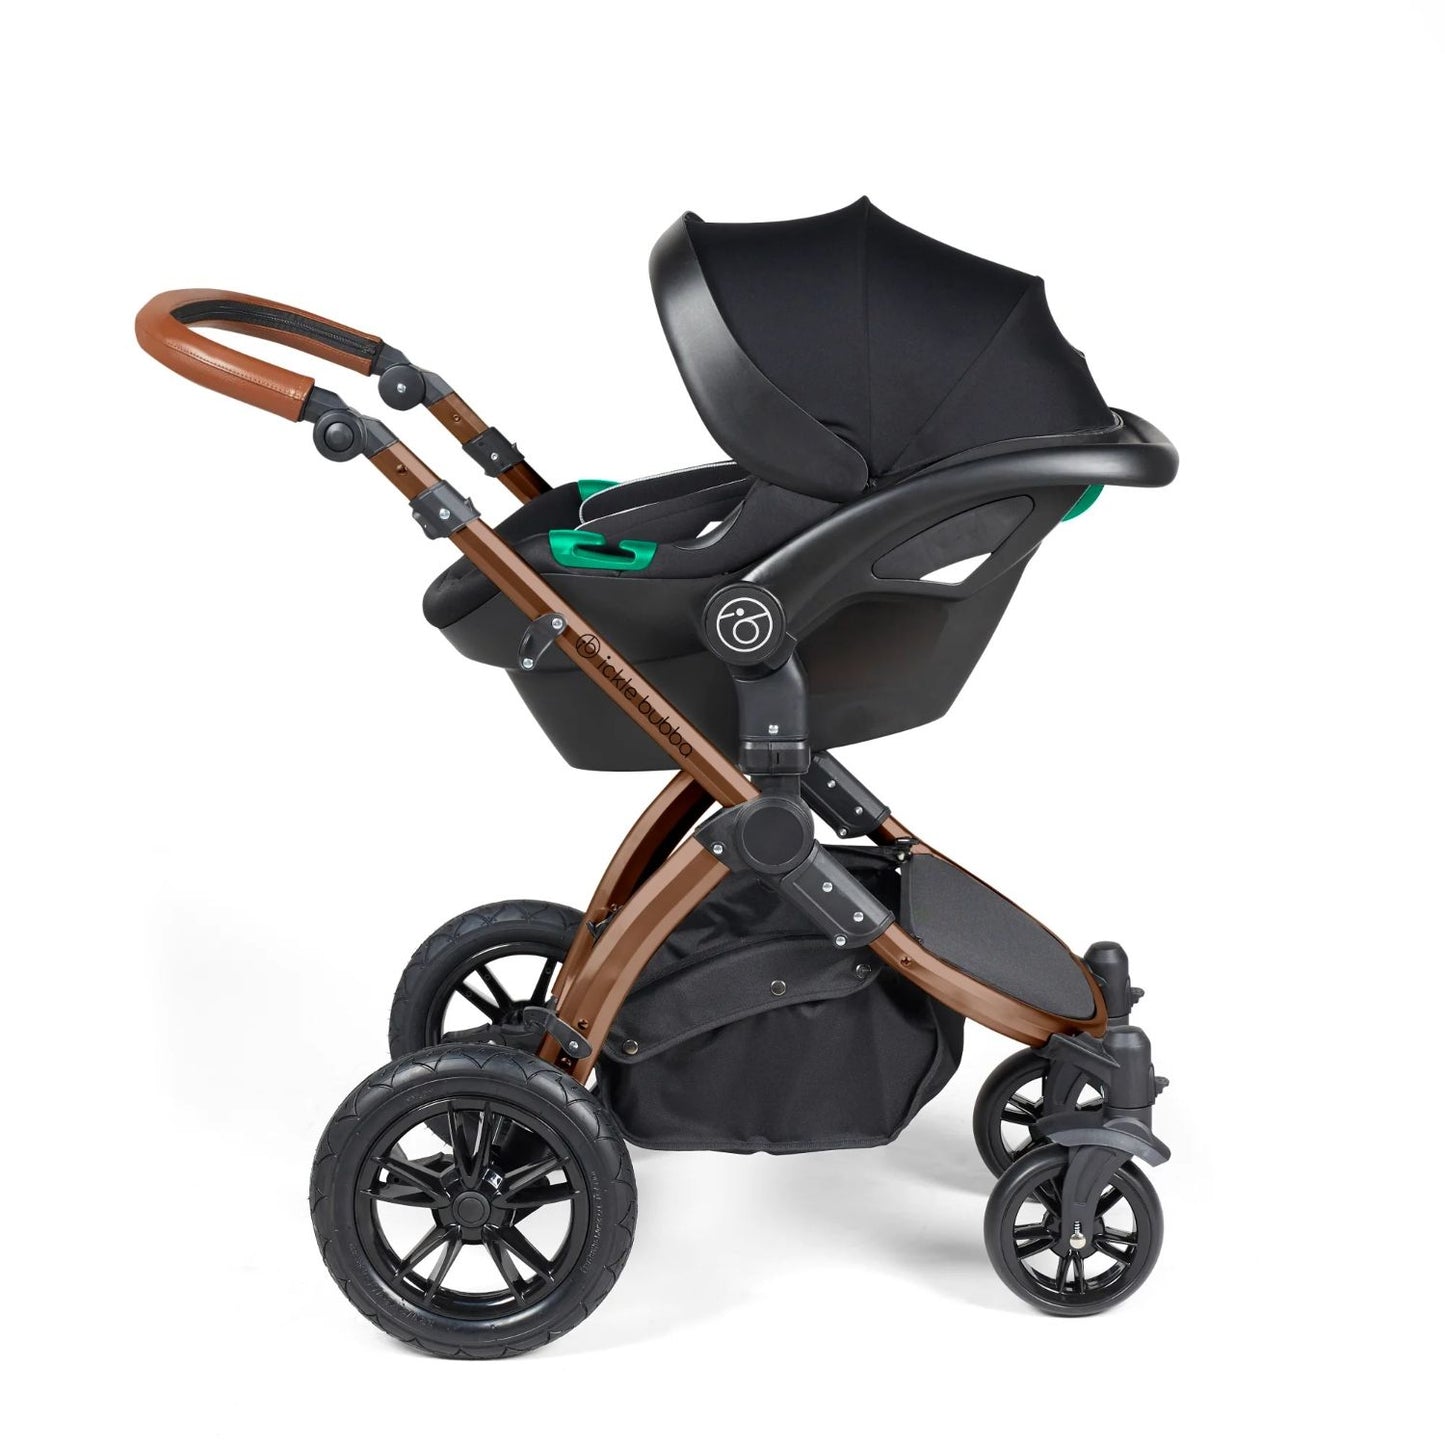 Ickle Bubba Stomp Luxe Pushchair with Stratus i-Size car seat attached in Midnight black colour with bronze chassis and tan handle